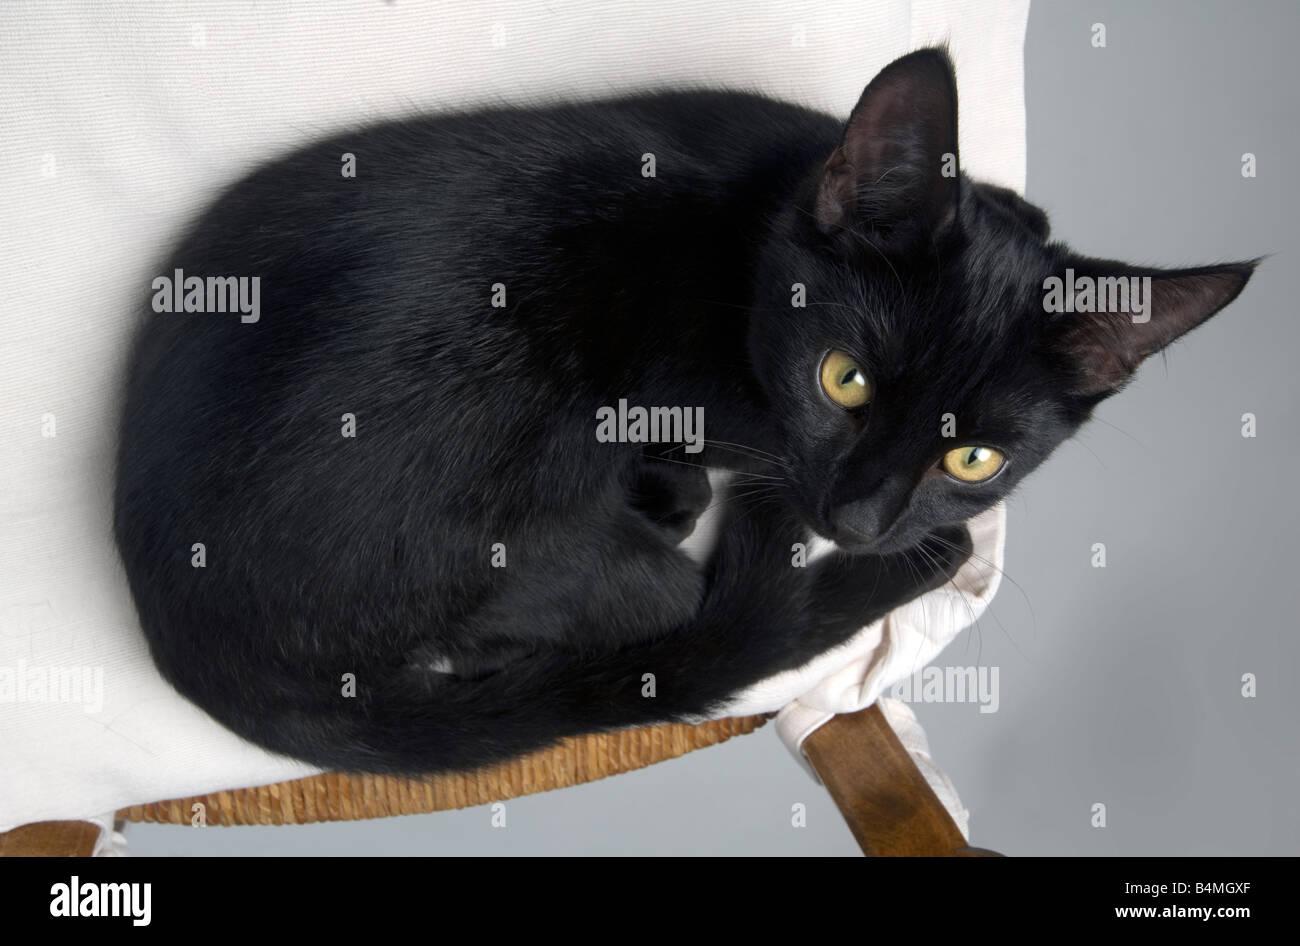 Black cat sits on a chair Stock Photo